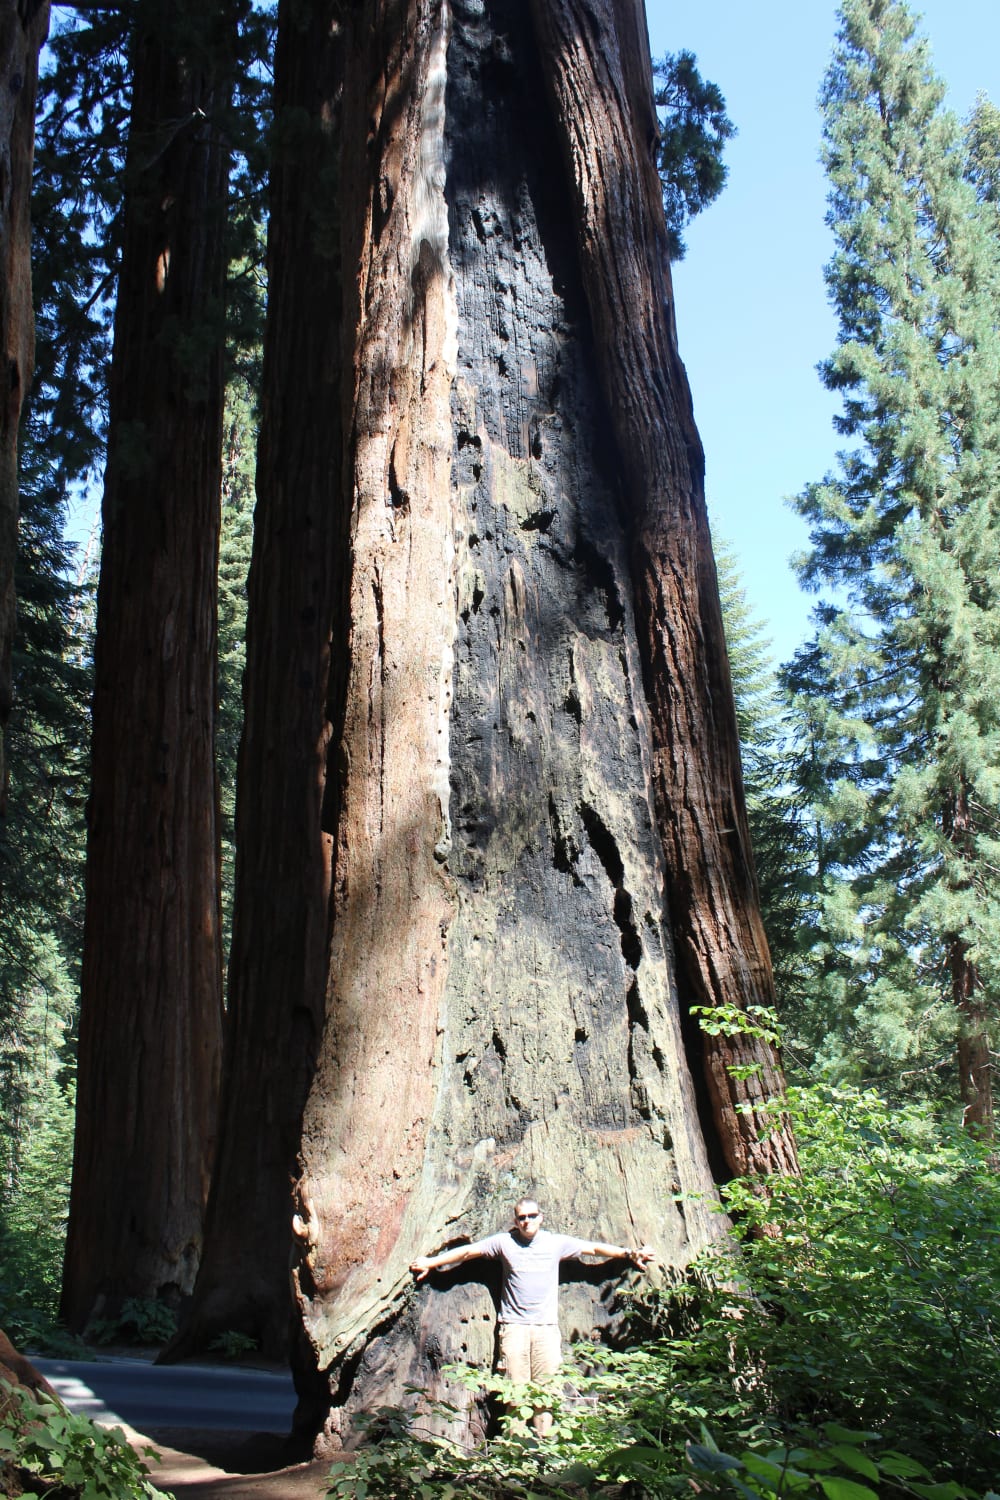 The gigantic trees of Sequoia National Park